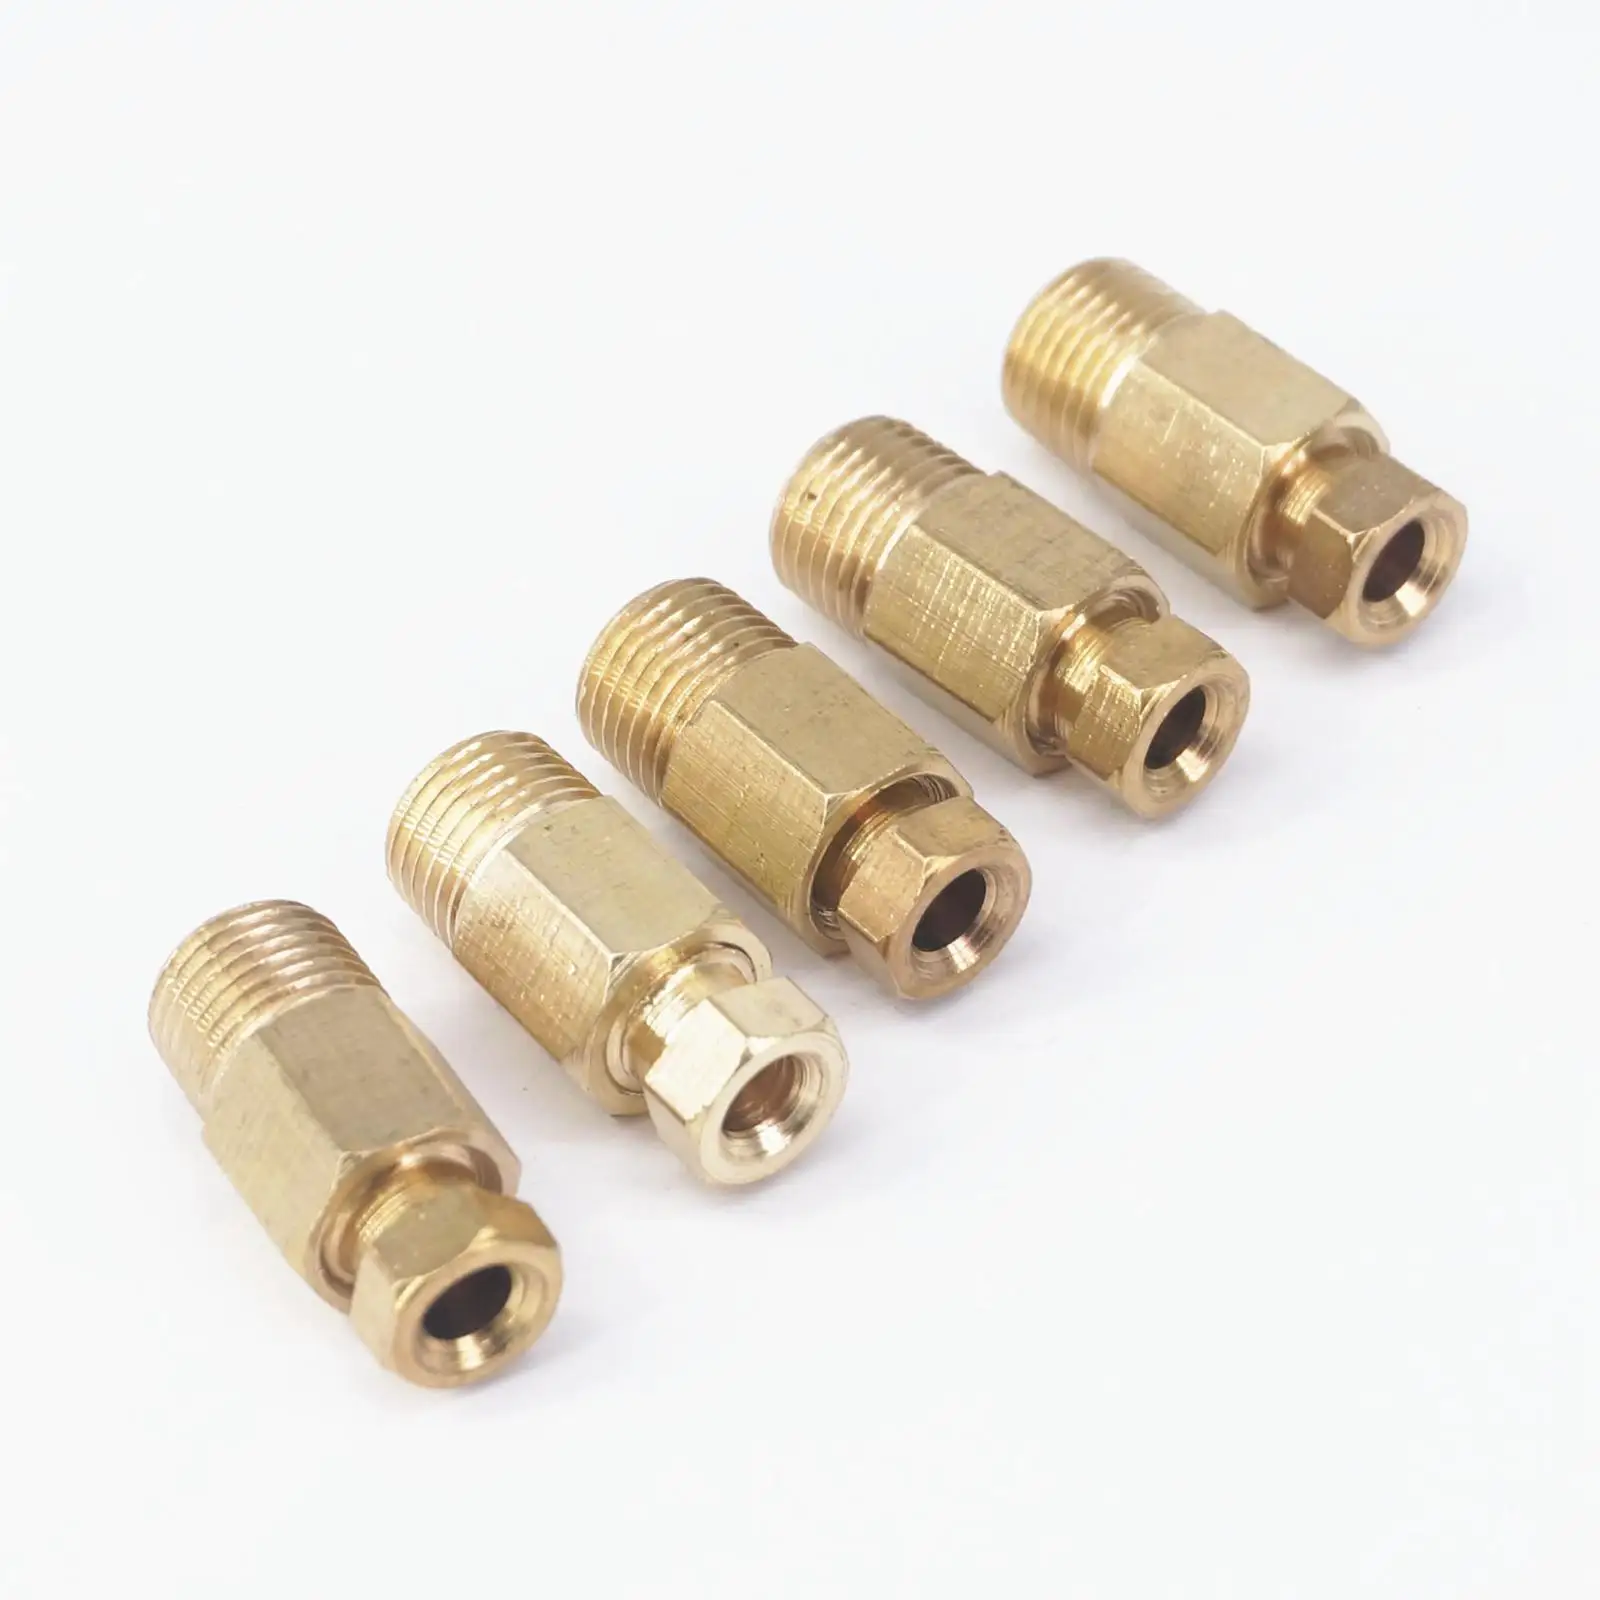 LOT5 1/8" BSP Male x 4mm ELbow Brass Connector Machine Tool Oil Filter Canister